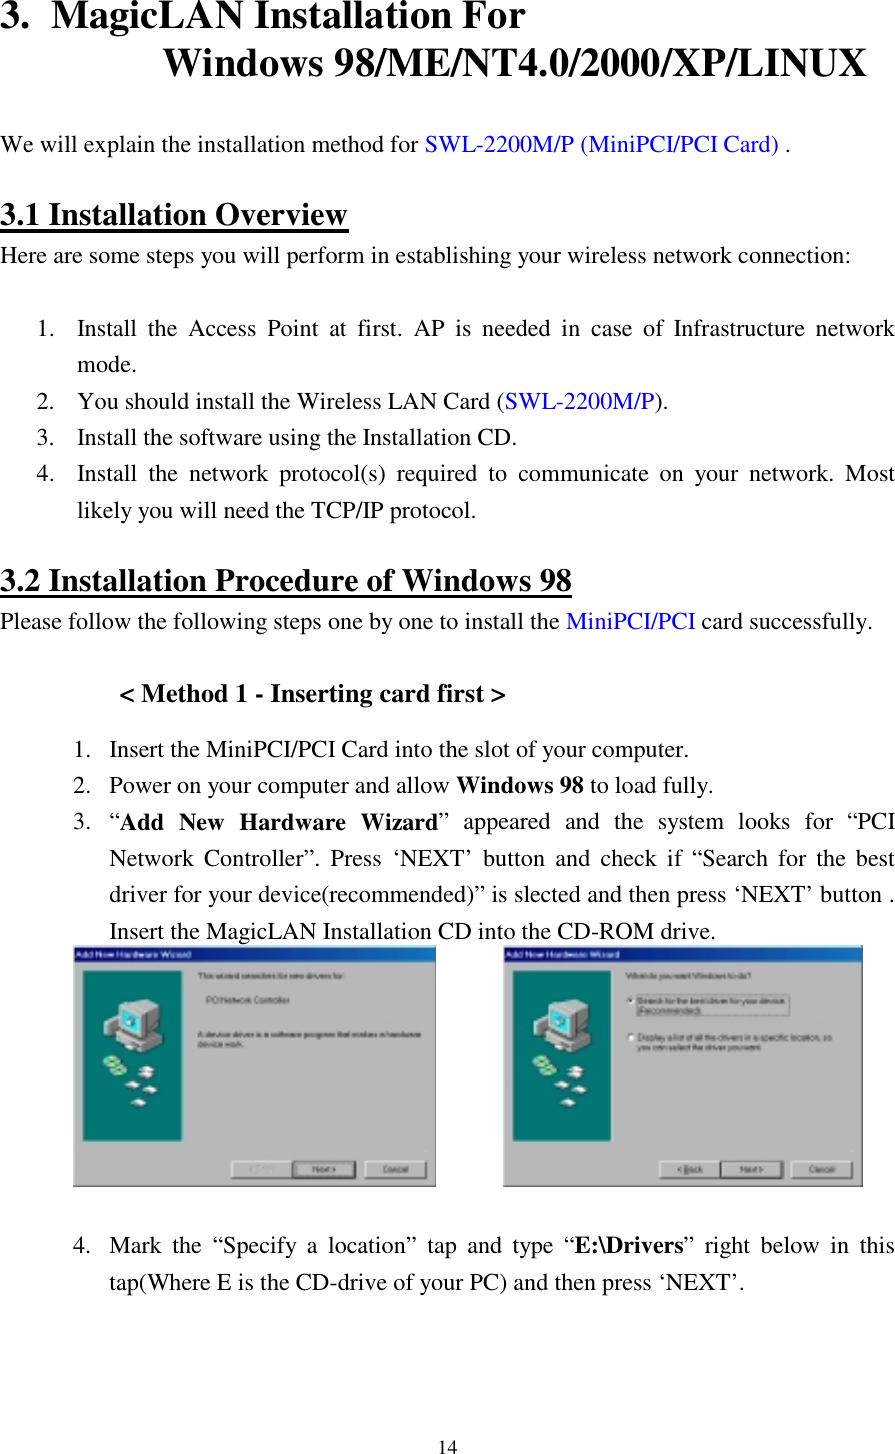  14 3.  MagicLAN Installation For                          Windows 98/ME/NT4.0/2000/XP/LINUX  We will explain the installation method for SWL-2200M/P (MiniPCI/PCI Card) .  3.1 Installation Overview Here are some steps you will perform in establishing your wireless network connection:  1.  Install the Access Point at first. AP is needed in case of Infrastructure network mode. 2.  You should install the Wireless LAN Card (SWL-2200M/P).  3.  Install the software using the Installation CD. 4.  Install the network protocol(s) required to communicate on your network. Most likely you will need the TCP/IP protocol.  3.2 Installation Procedure of Windows 98 Please follow the following steps one by one to install the MiniPCI/PCI card successfully.  &lt; Method 1 - Inserting card first &gt; 1.  Insert the MiniPCI/PCI Card into the slot of your computer.  2.  Power on your computer and allow Windows 98 to load fully.  3. “Add New Hardware Wizard” appeared and the system looks for “PCI Network Controller”. Press ‘NEXT’ button and check if “Search for the best driver for your device(recommended)” is slected and then press ‘NEXT’ button . Insert the MagicLAN Installation CD into the CD-ROM drive.                4.  Mark the “Specify a location” tap and type “E:\Drivers” right below in this tap(Where E is the CD-drive of your PC) and then press ‘NEXT’. 